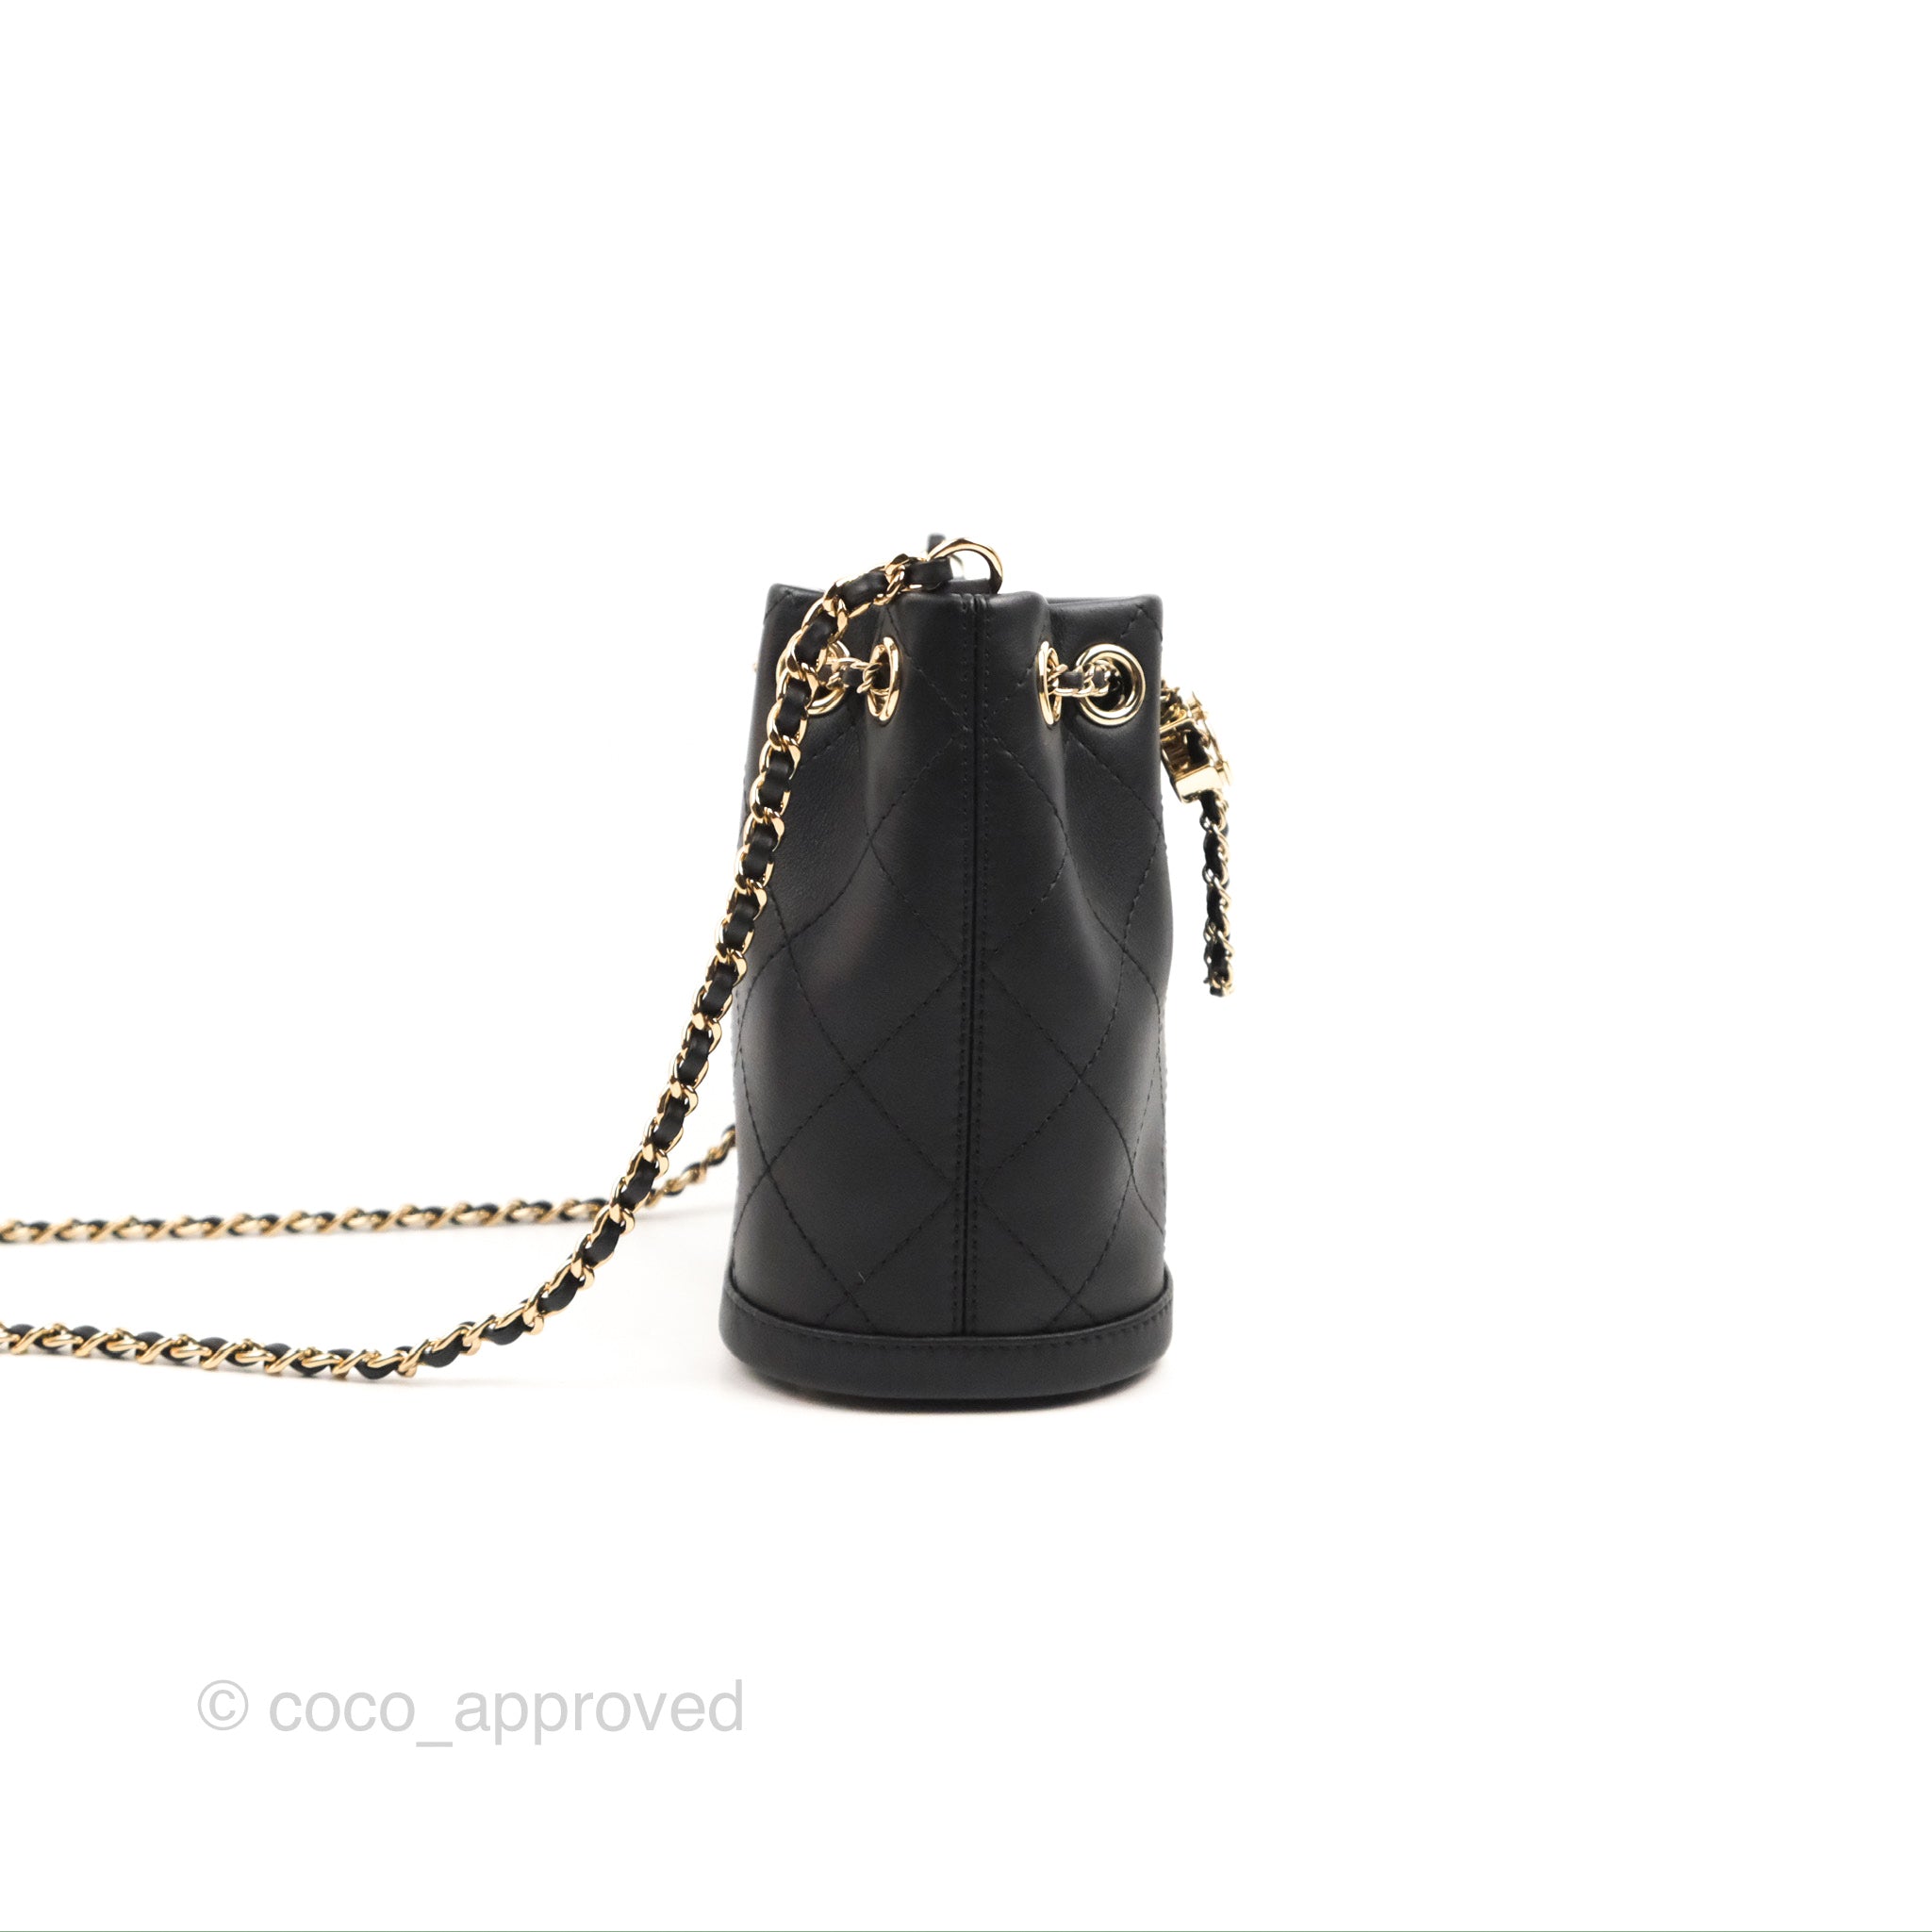 Chanel Drawstring Quilted Bucket Bag, Beige Calfskin with Gold Hardware,  New in Dustbag WA001